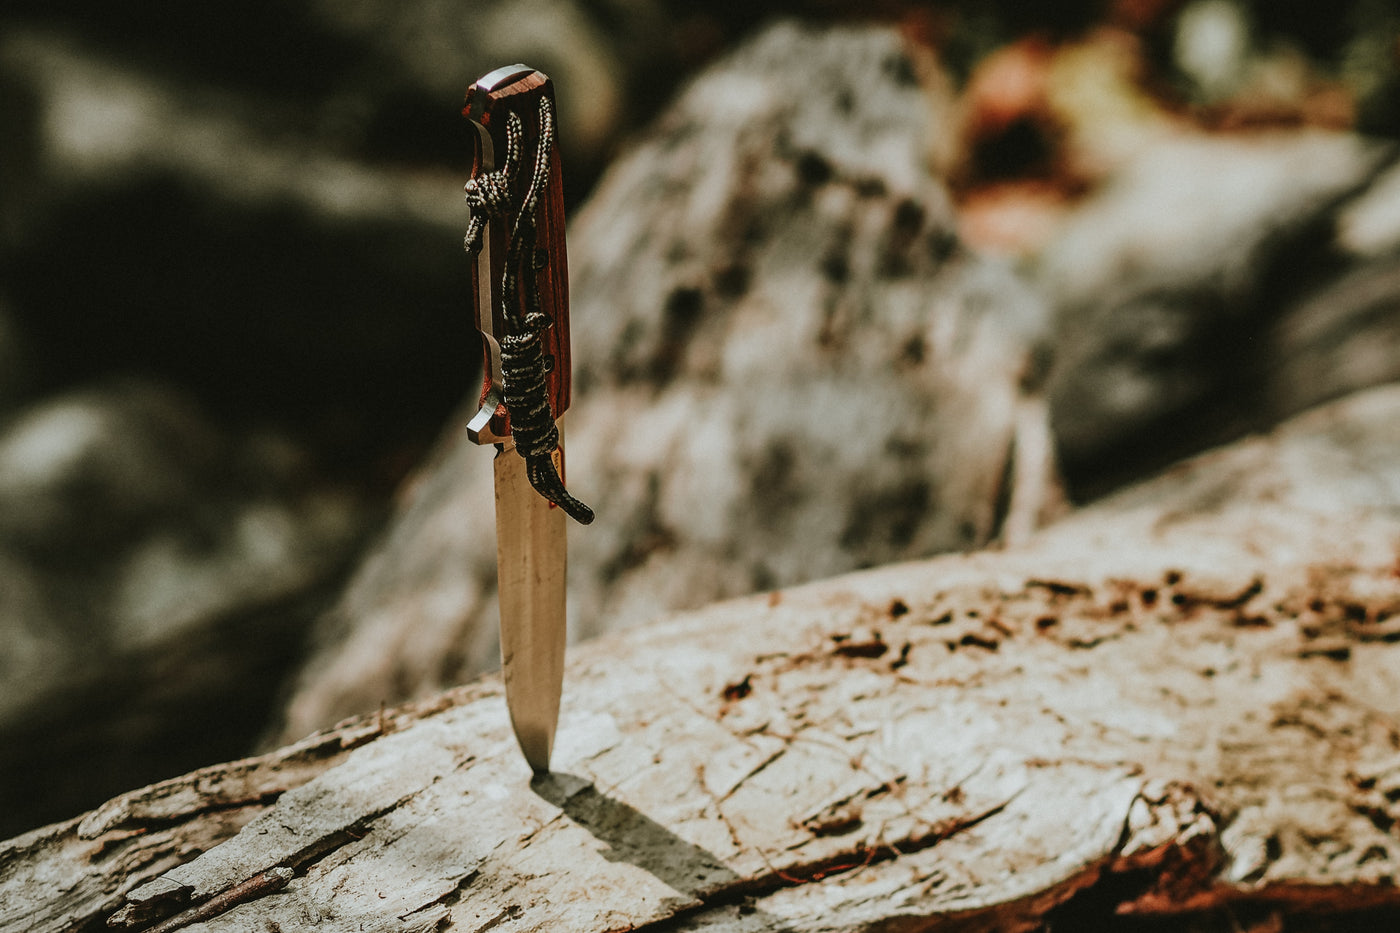 Here at Dream-Knives you will find a wide range of high quality knives from the famous knife manufactures like Puma, Boker, Böker, Muela, Cudeman, Eickhorn and Victorinox. We offer the best prices and the fairest shipping. *Buy with confidence*